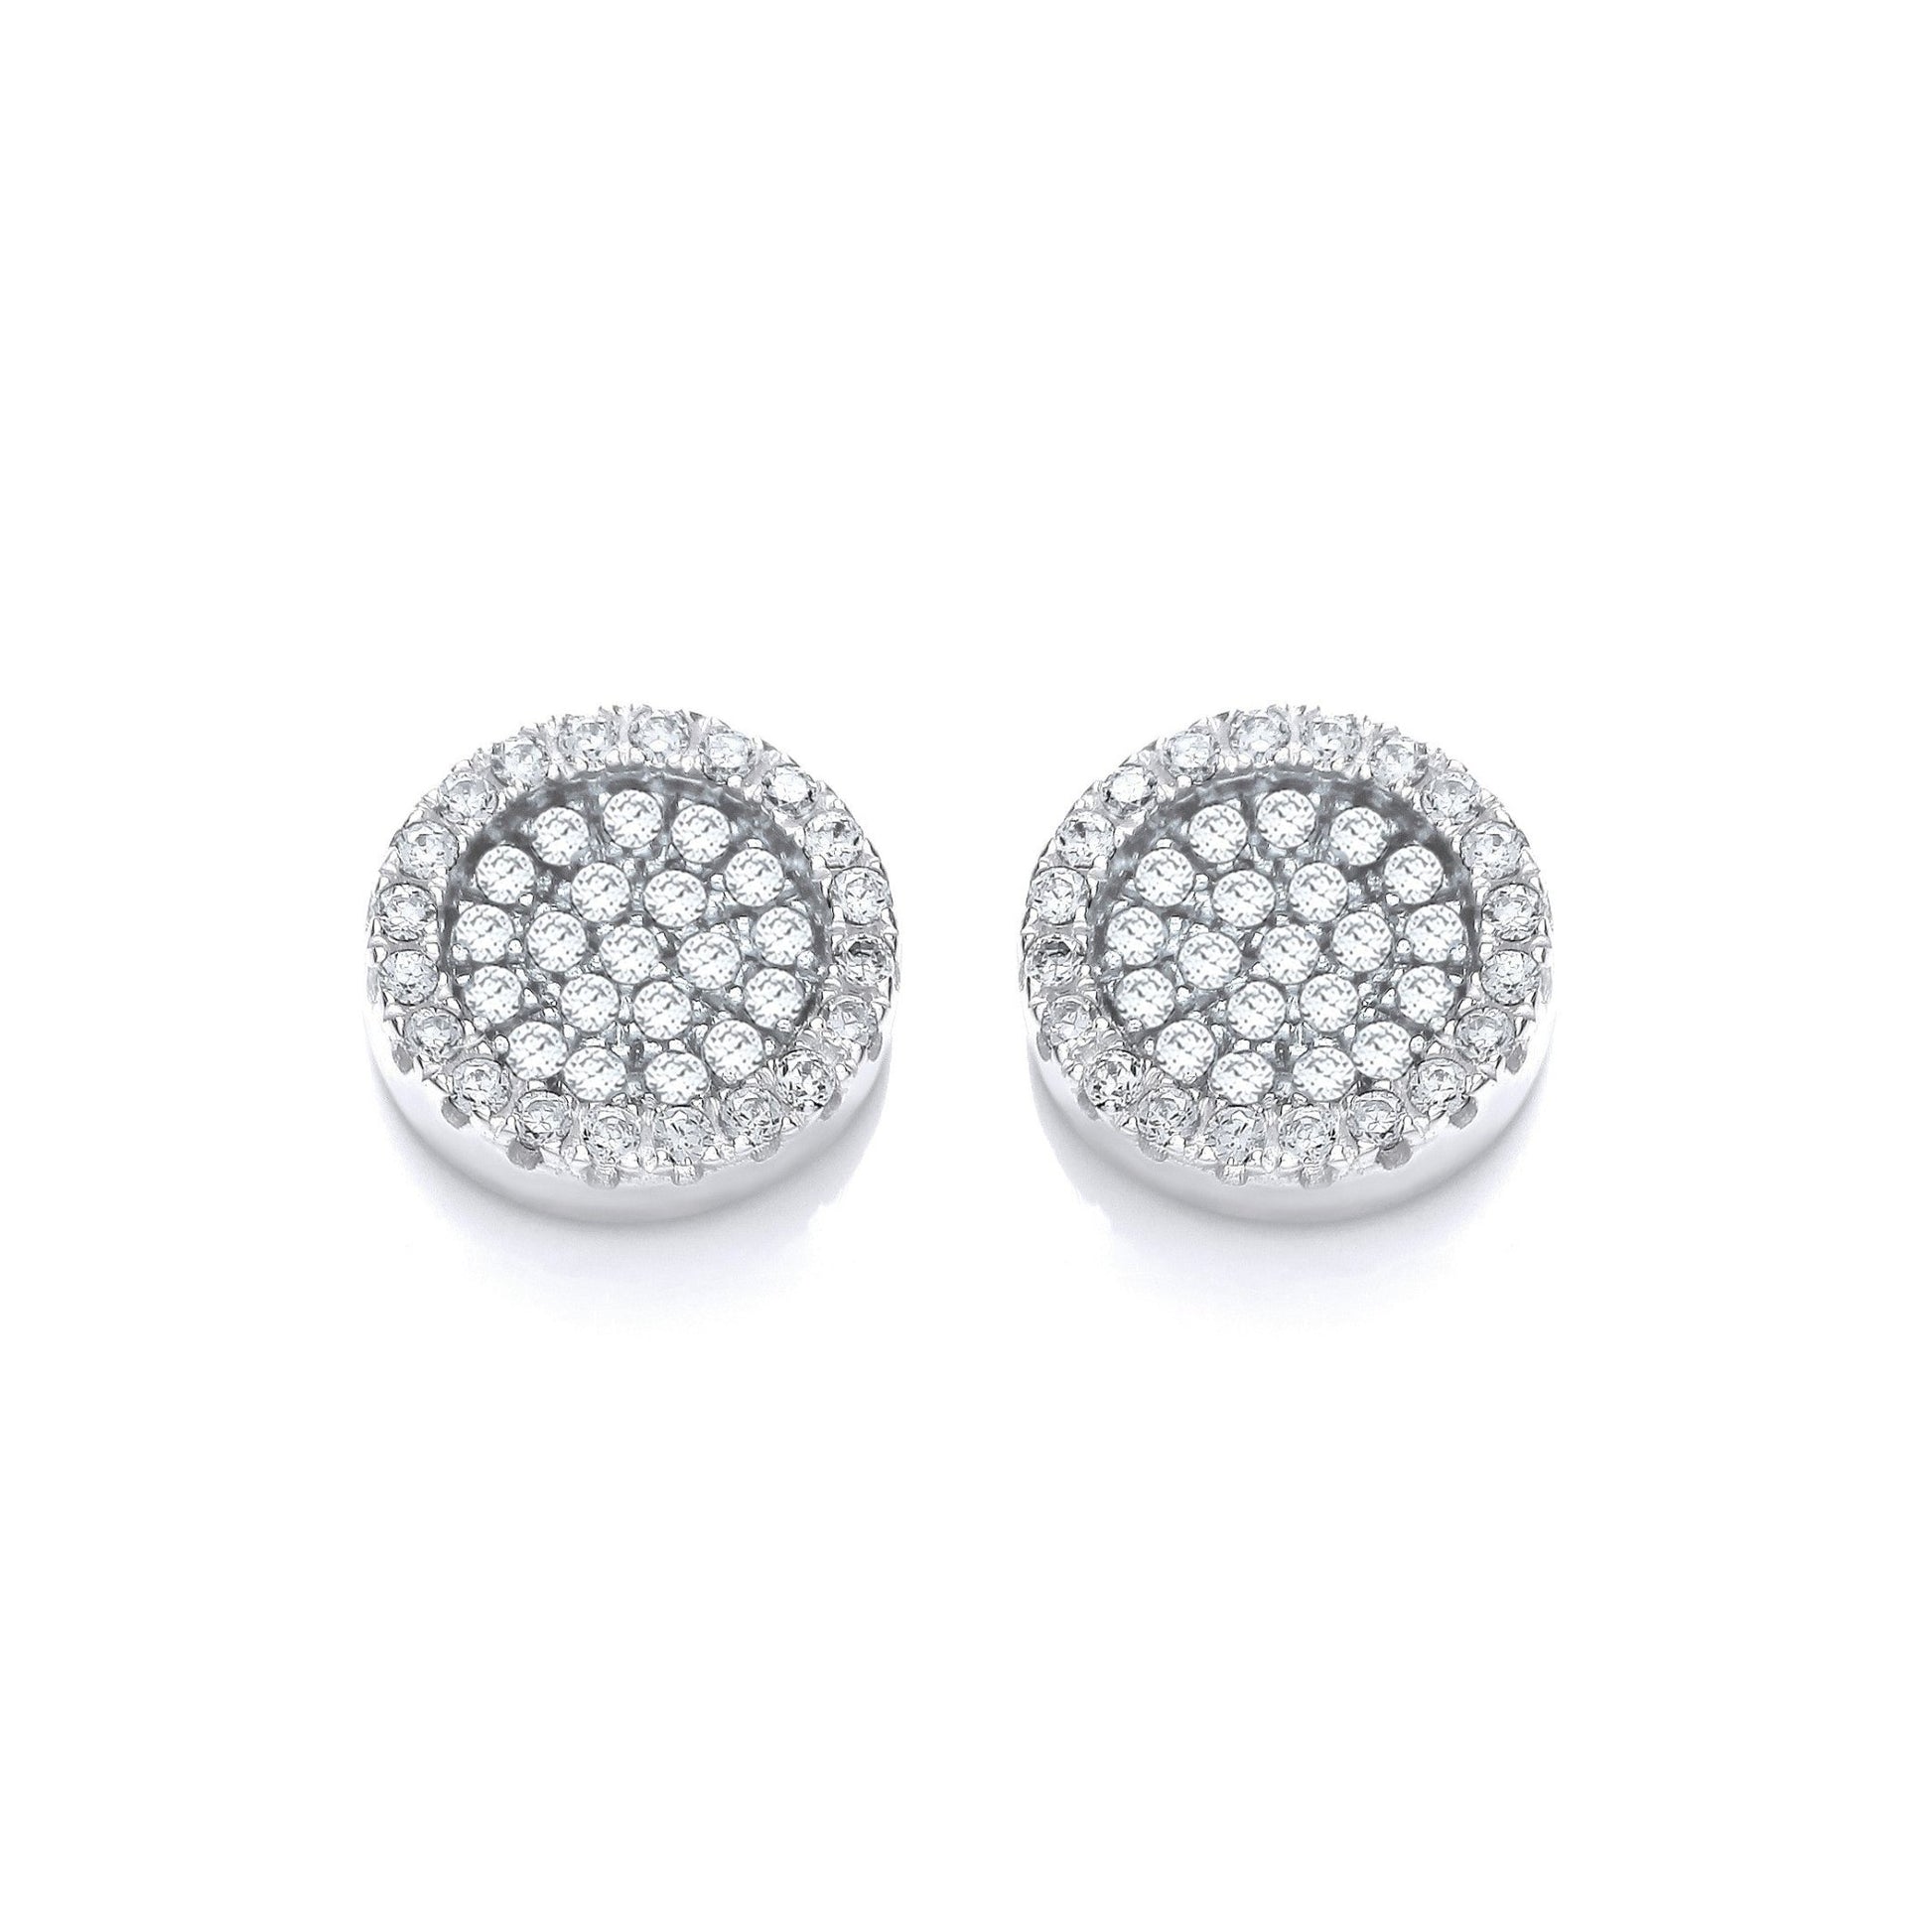 Cluster Stud 925 Sterling Silver Earrings Set With CZs - FJewellery